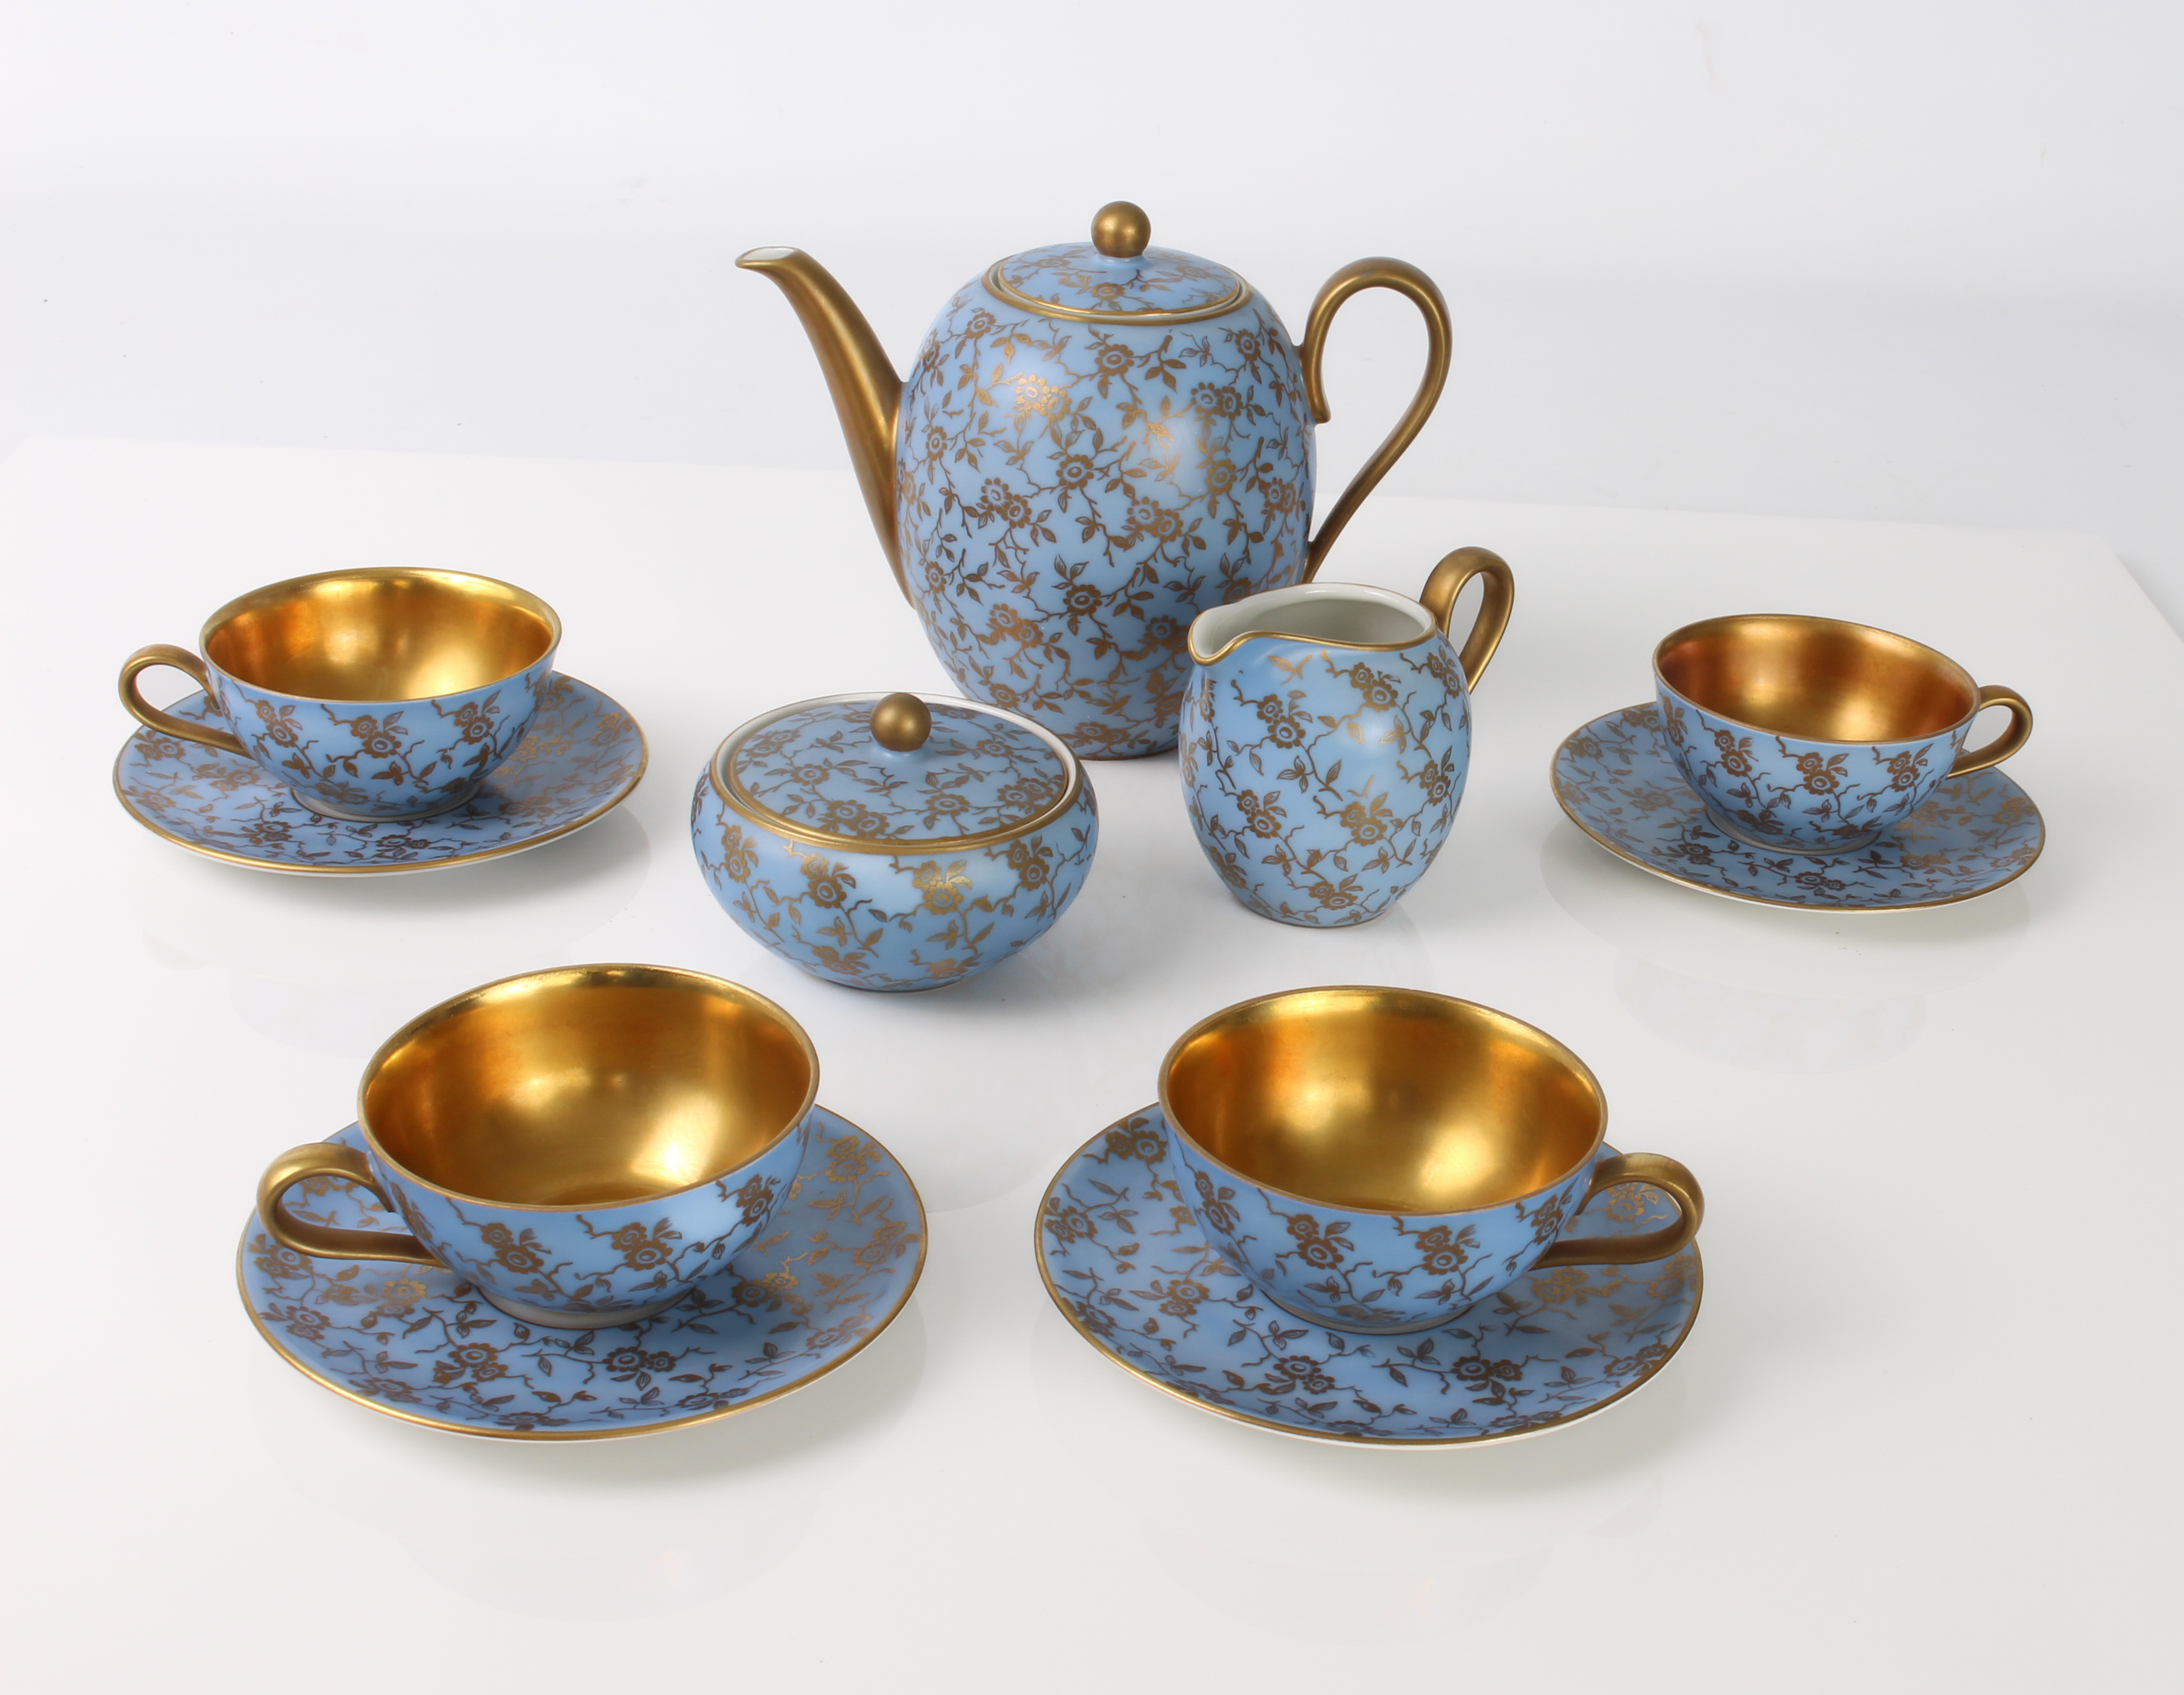 A German porcelain coffee set by Rhenania of Duisdorf - 1920s-30s, decorated with overall gilt